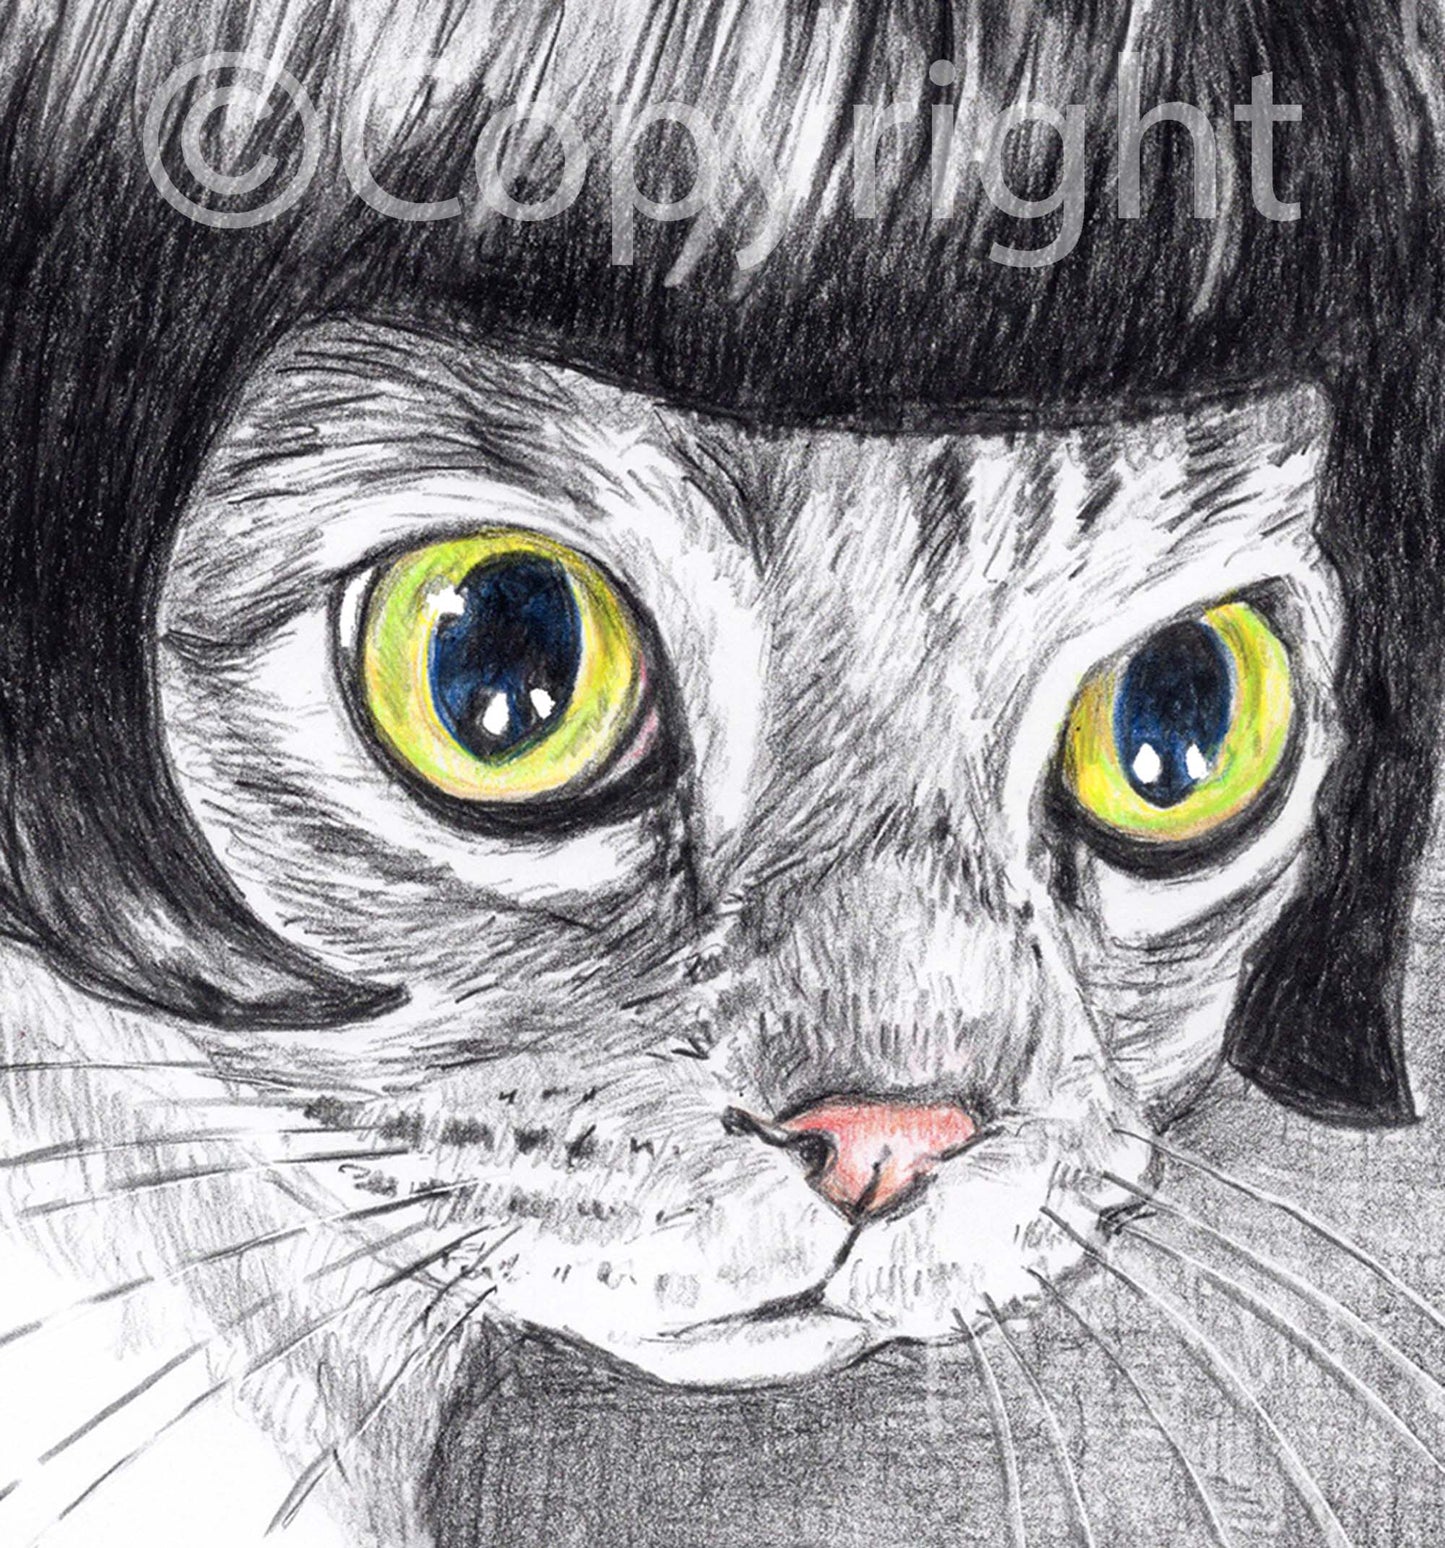 Black and white crayon drawing of a Siamese cat styled like a silent movie star. Art by Deidre Wicks